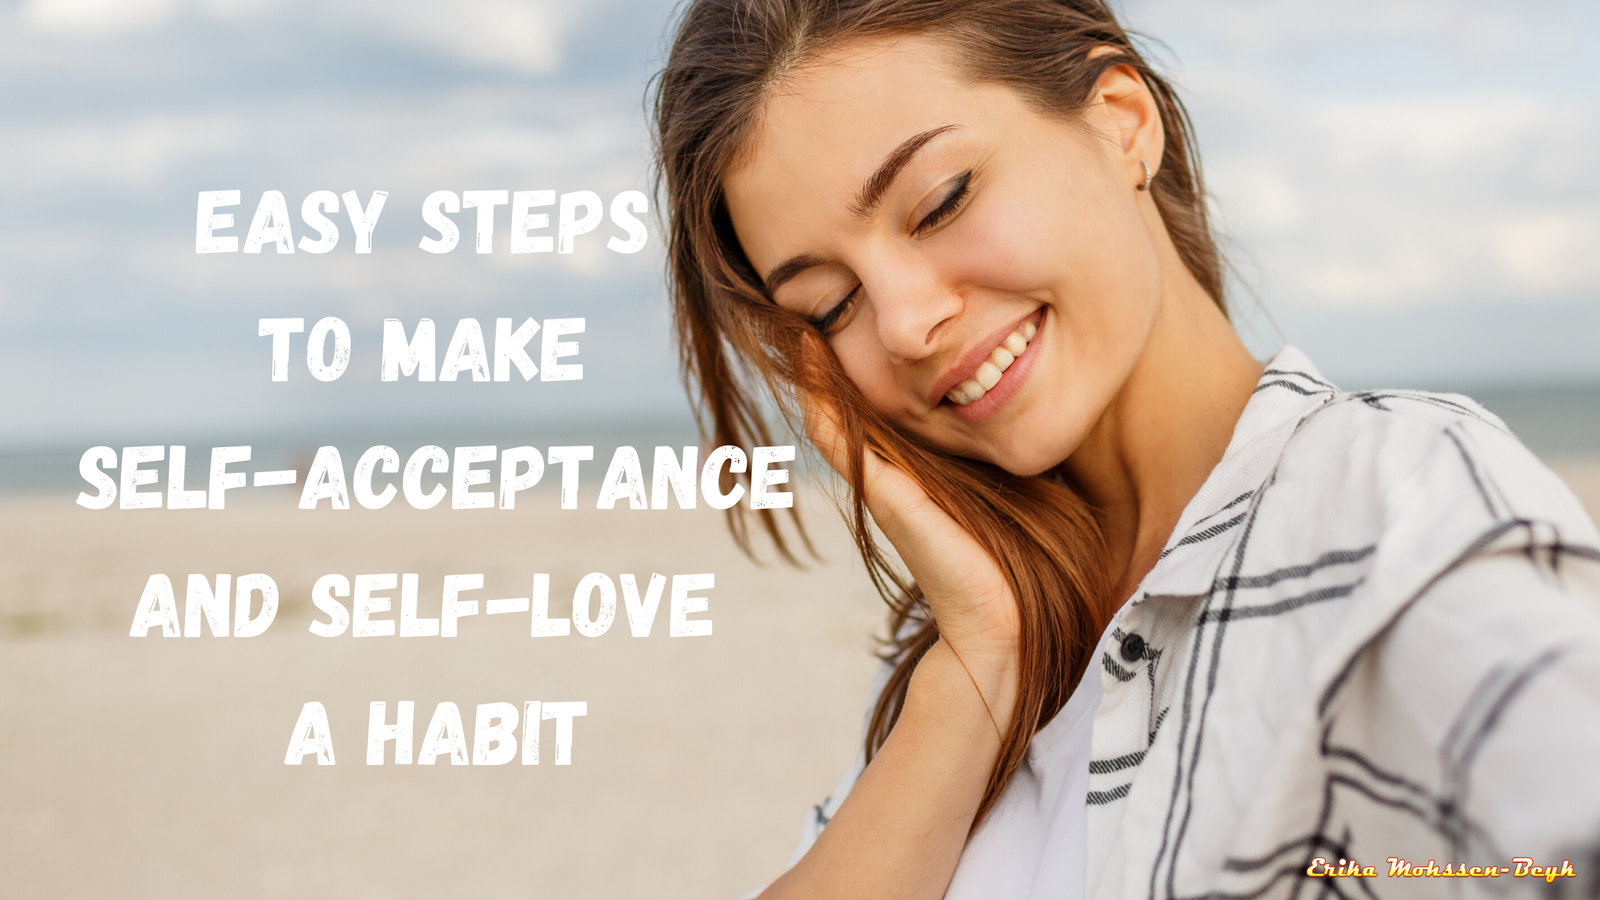 Easy steps to make self-acceptance and self-love a habit